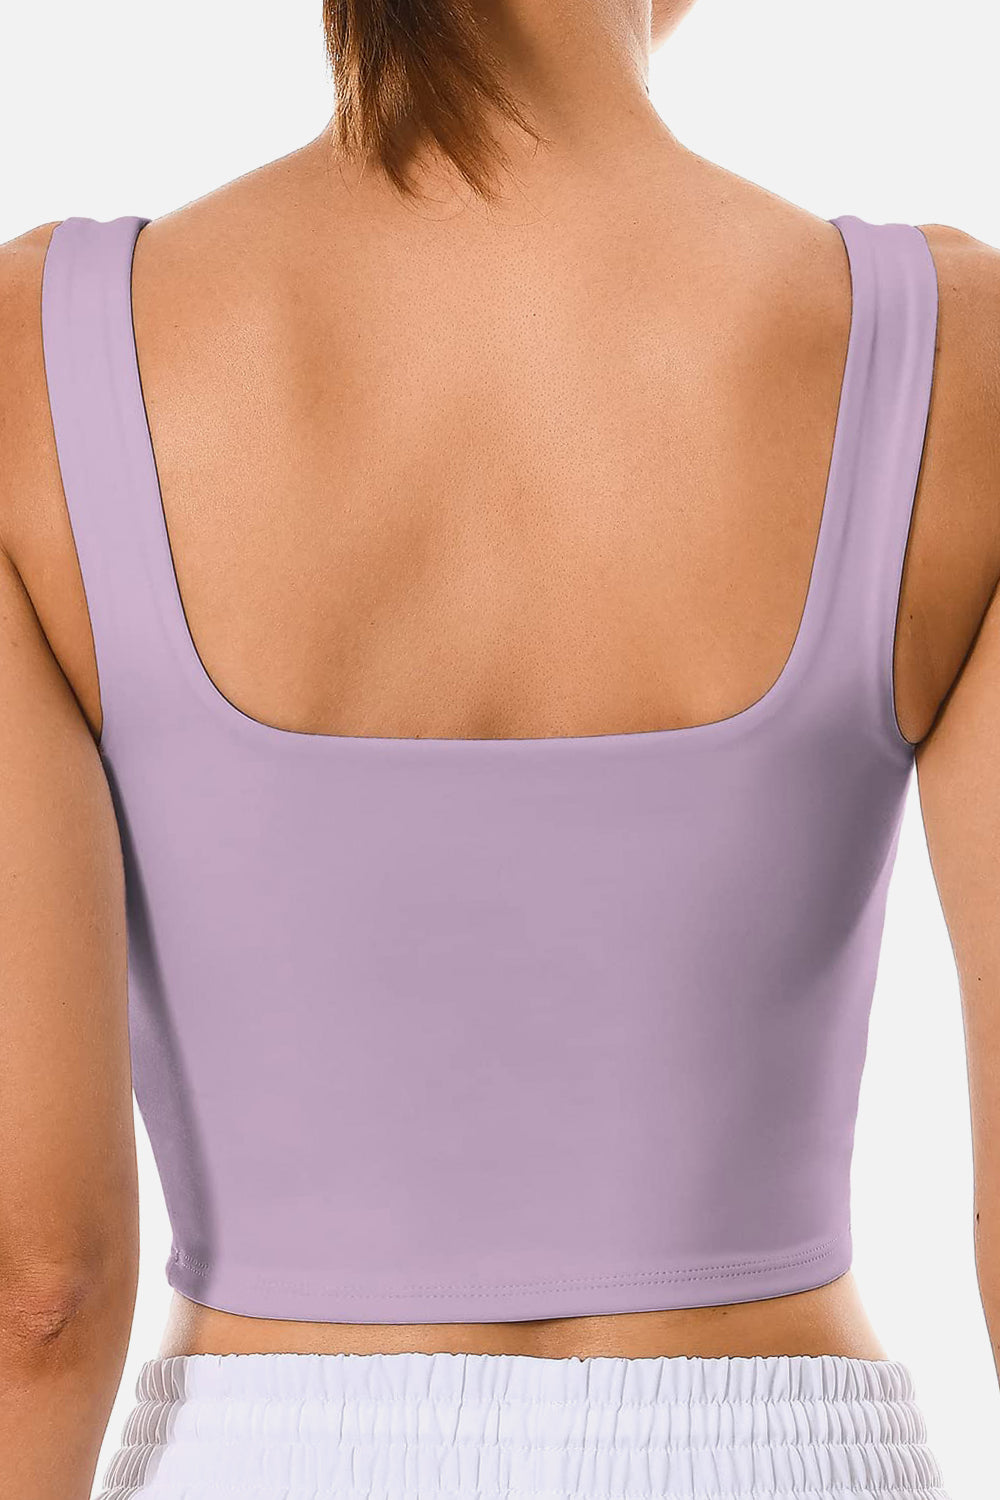 PINKMSTYLE Womens Square Neck Tank Tops Cute Double Layer Workout